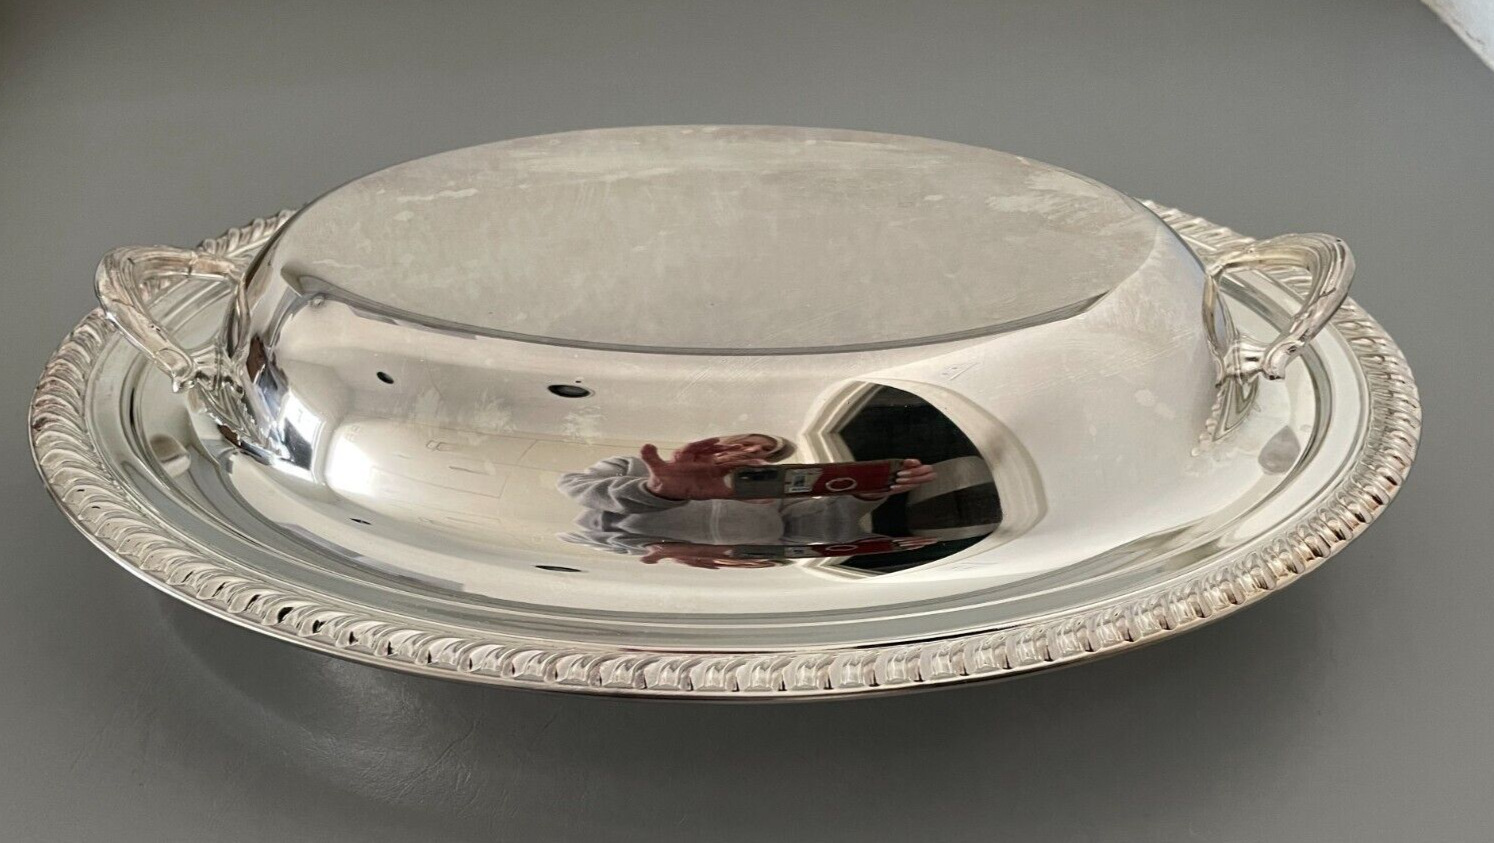 SILVERPLATE VEGETABLE SERVING DISH, Vintage Midcentury Covered Oval w/ Lid